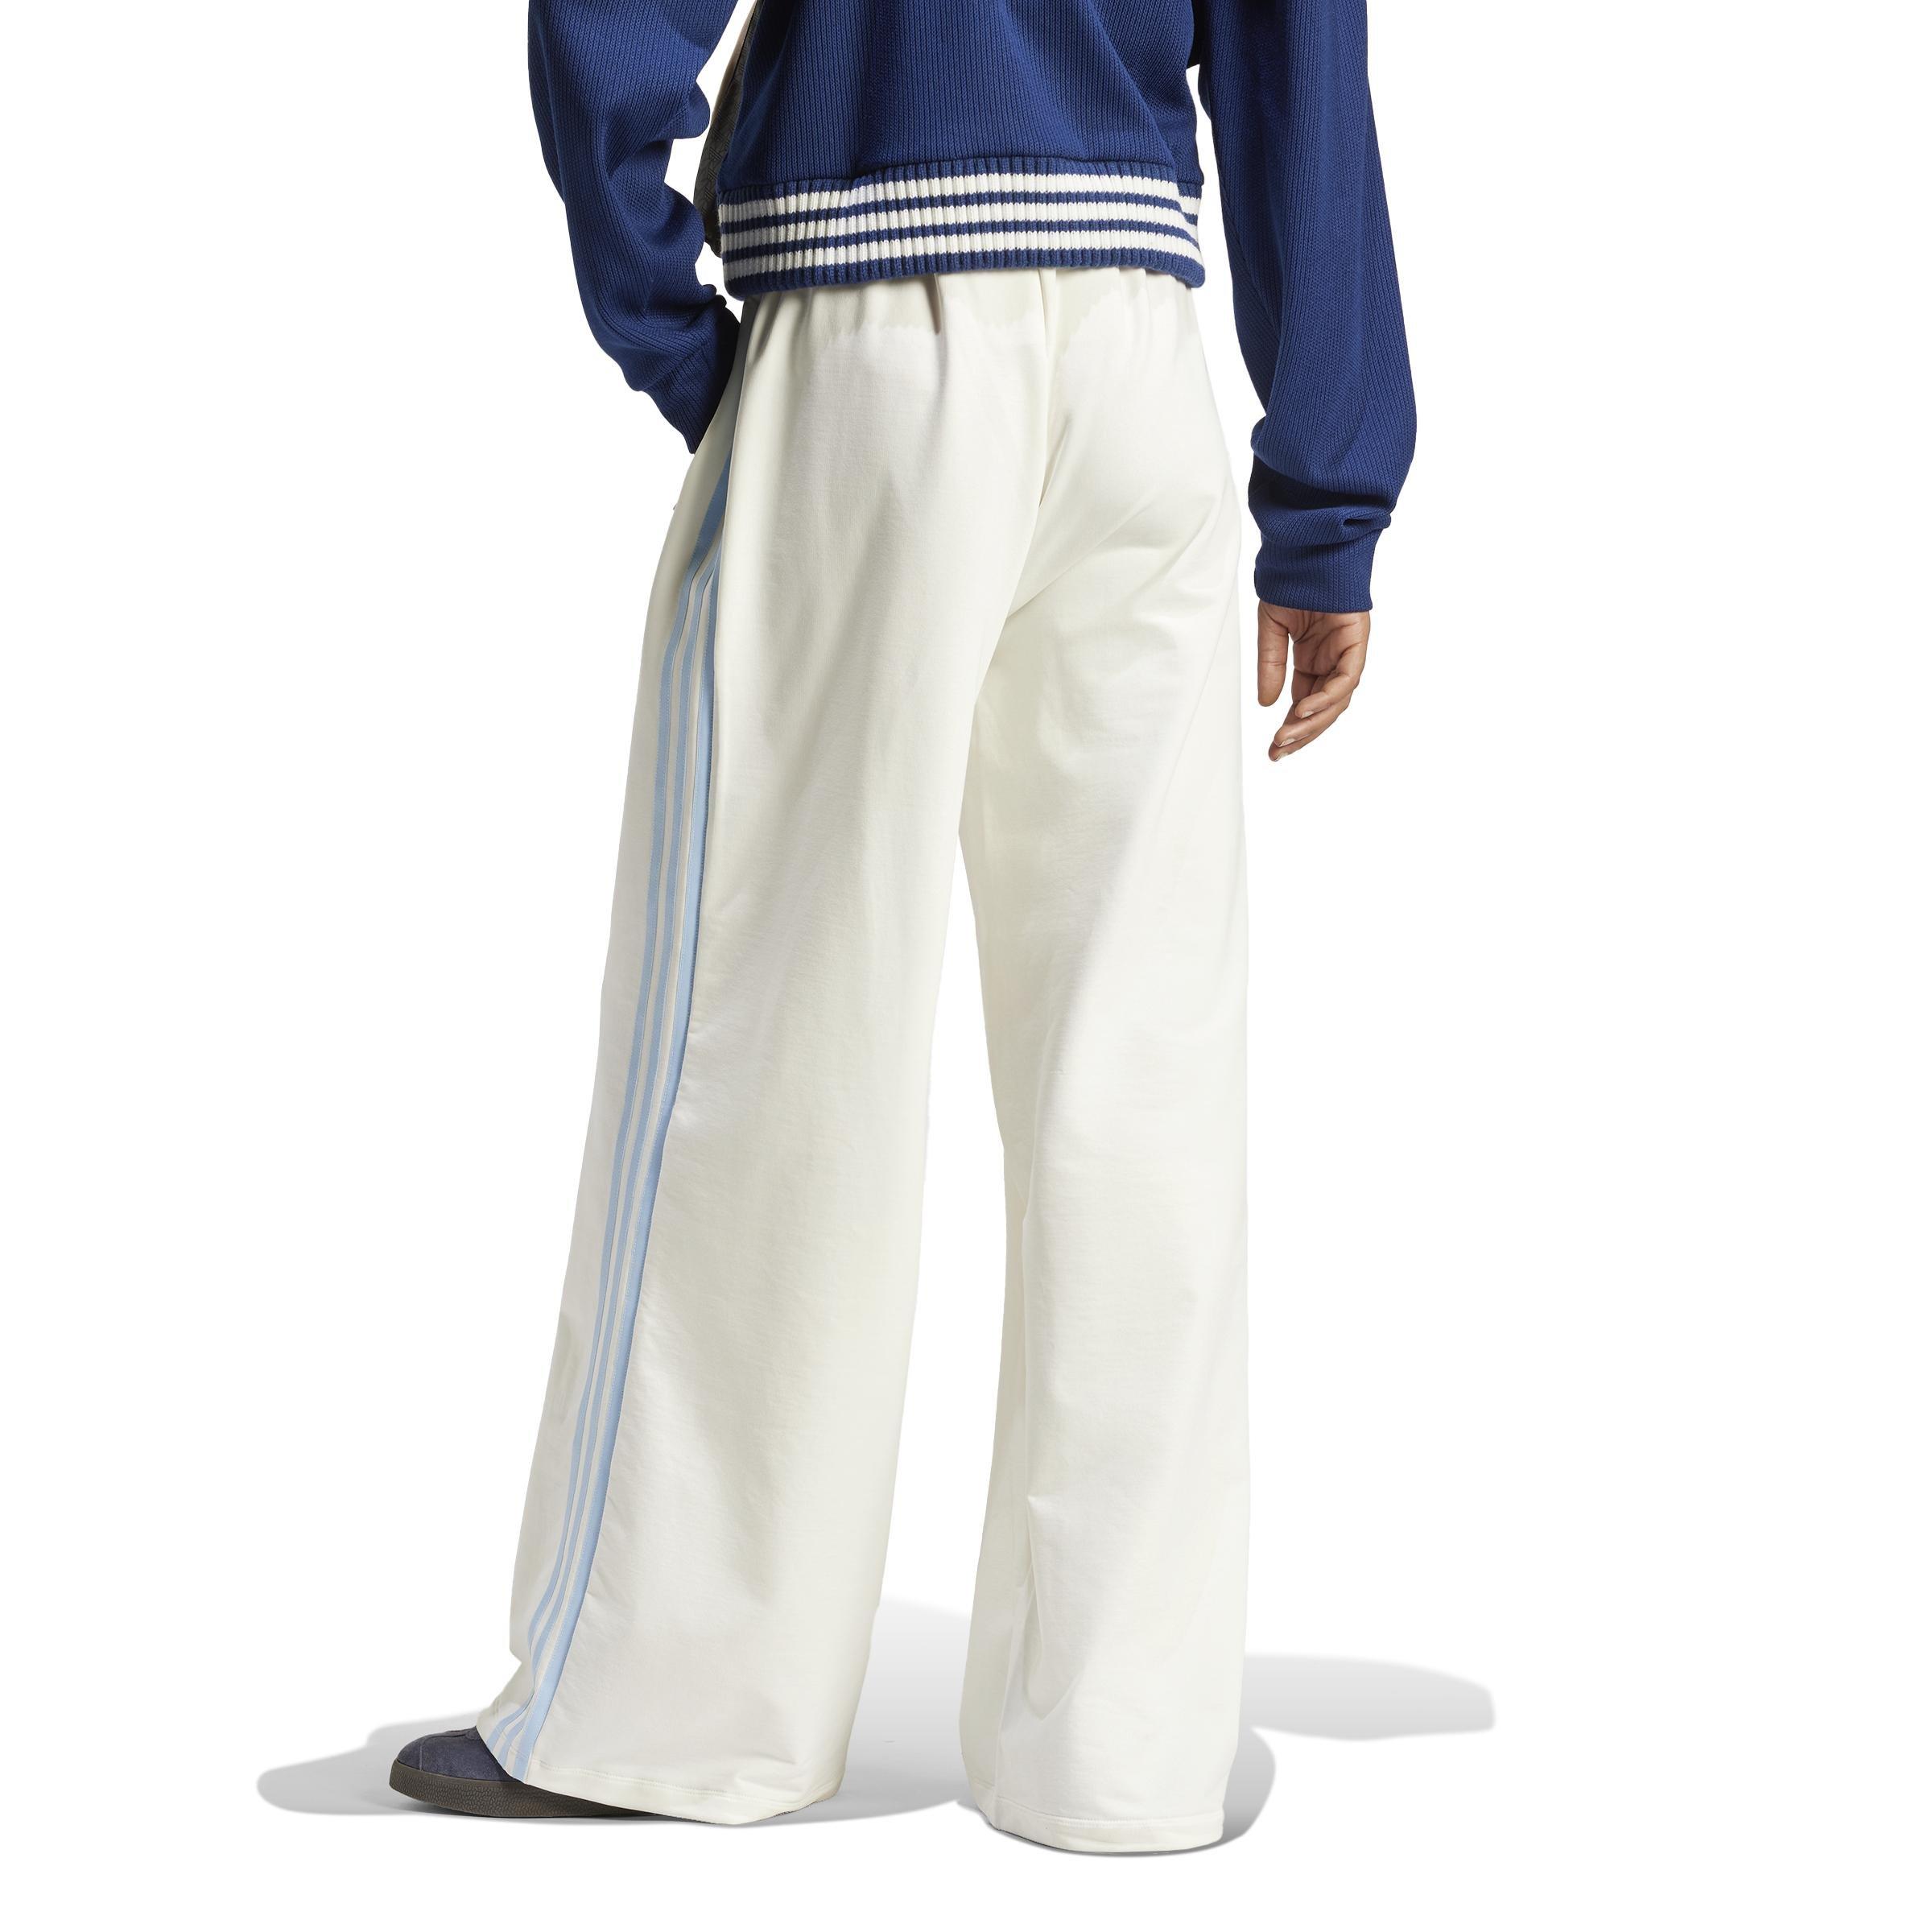 adidas - Women Loose Track Suit Joggers, White